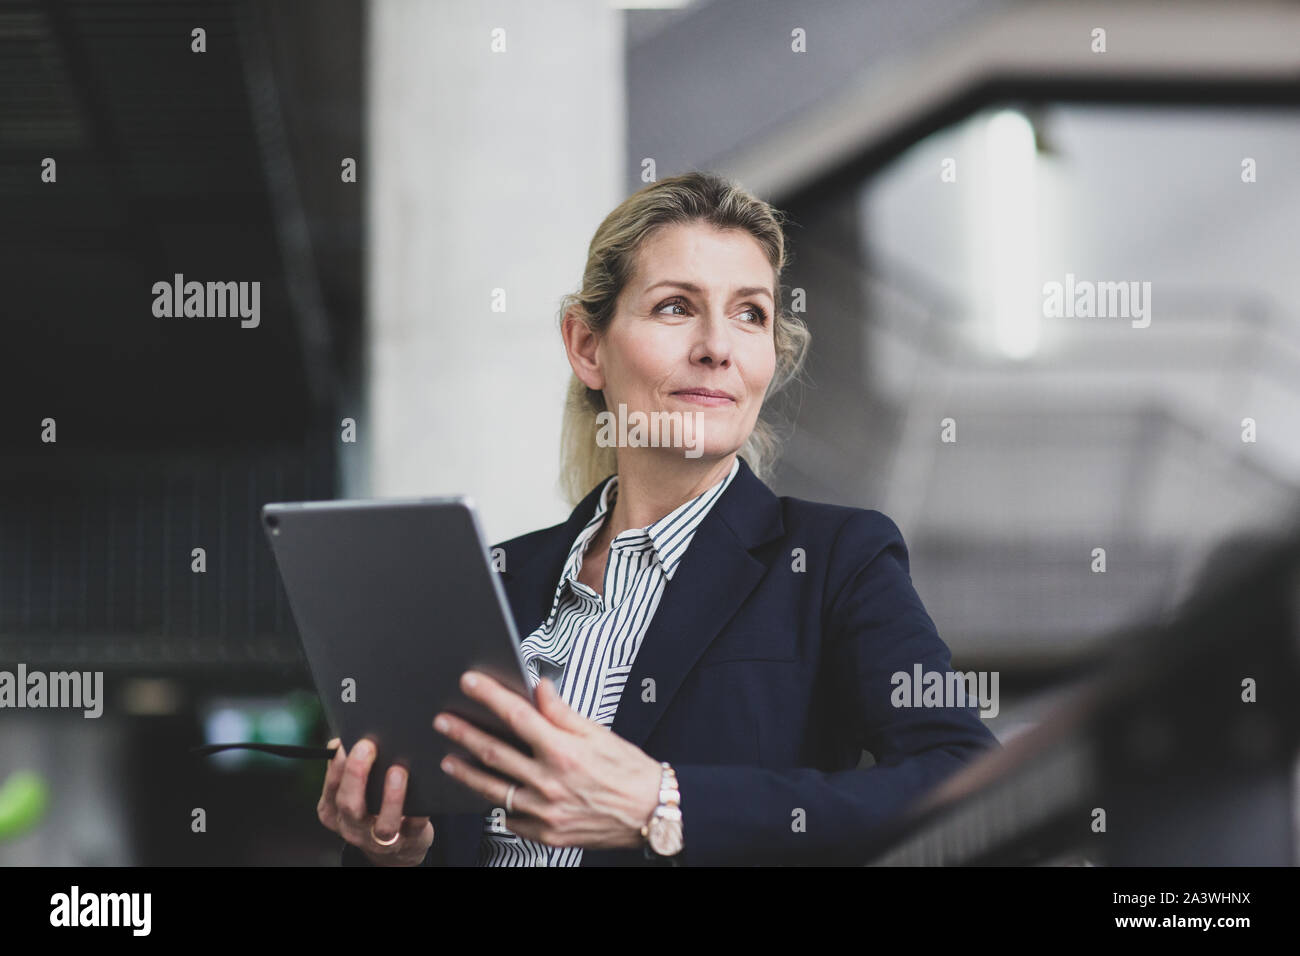 Senior female business executive using digital tablet in a Corporate Office Banque D'Images